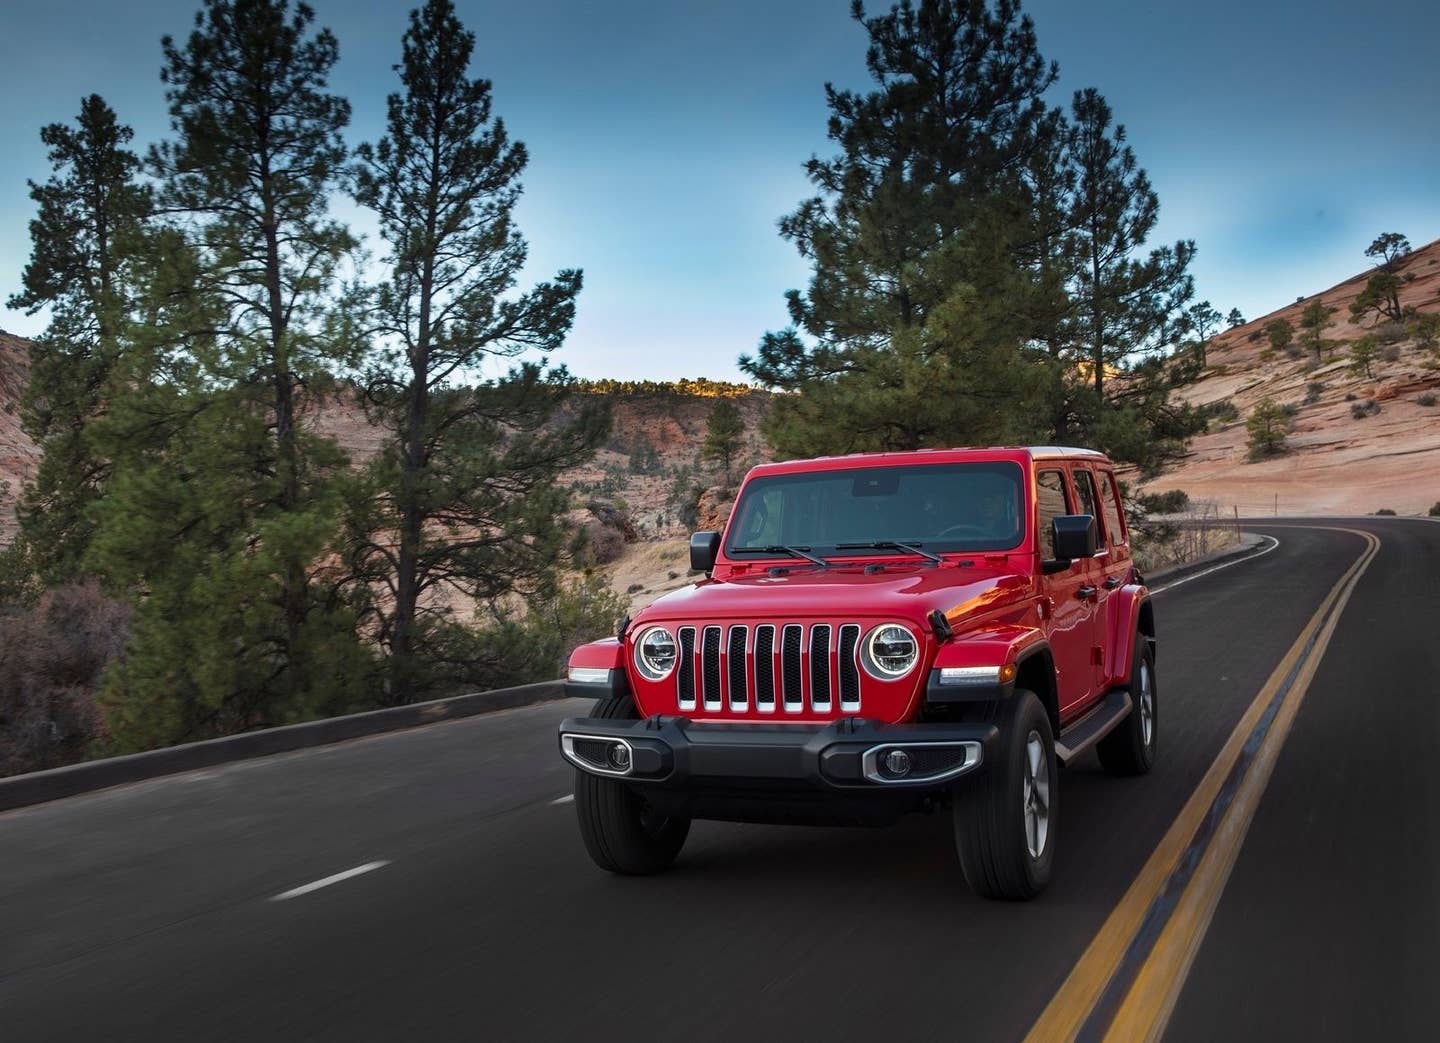 Jeep Wrangler Also Losing the Diesel Option: Report